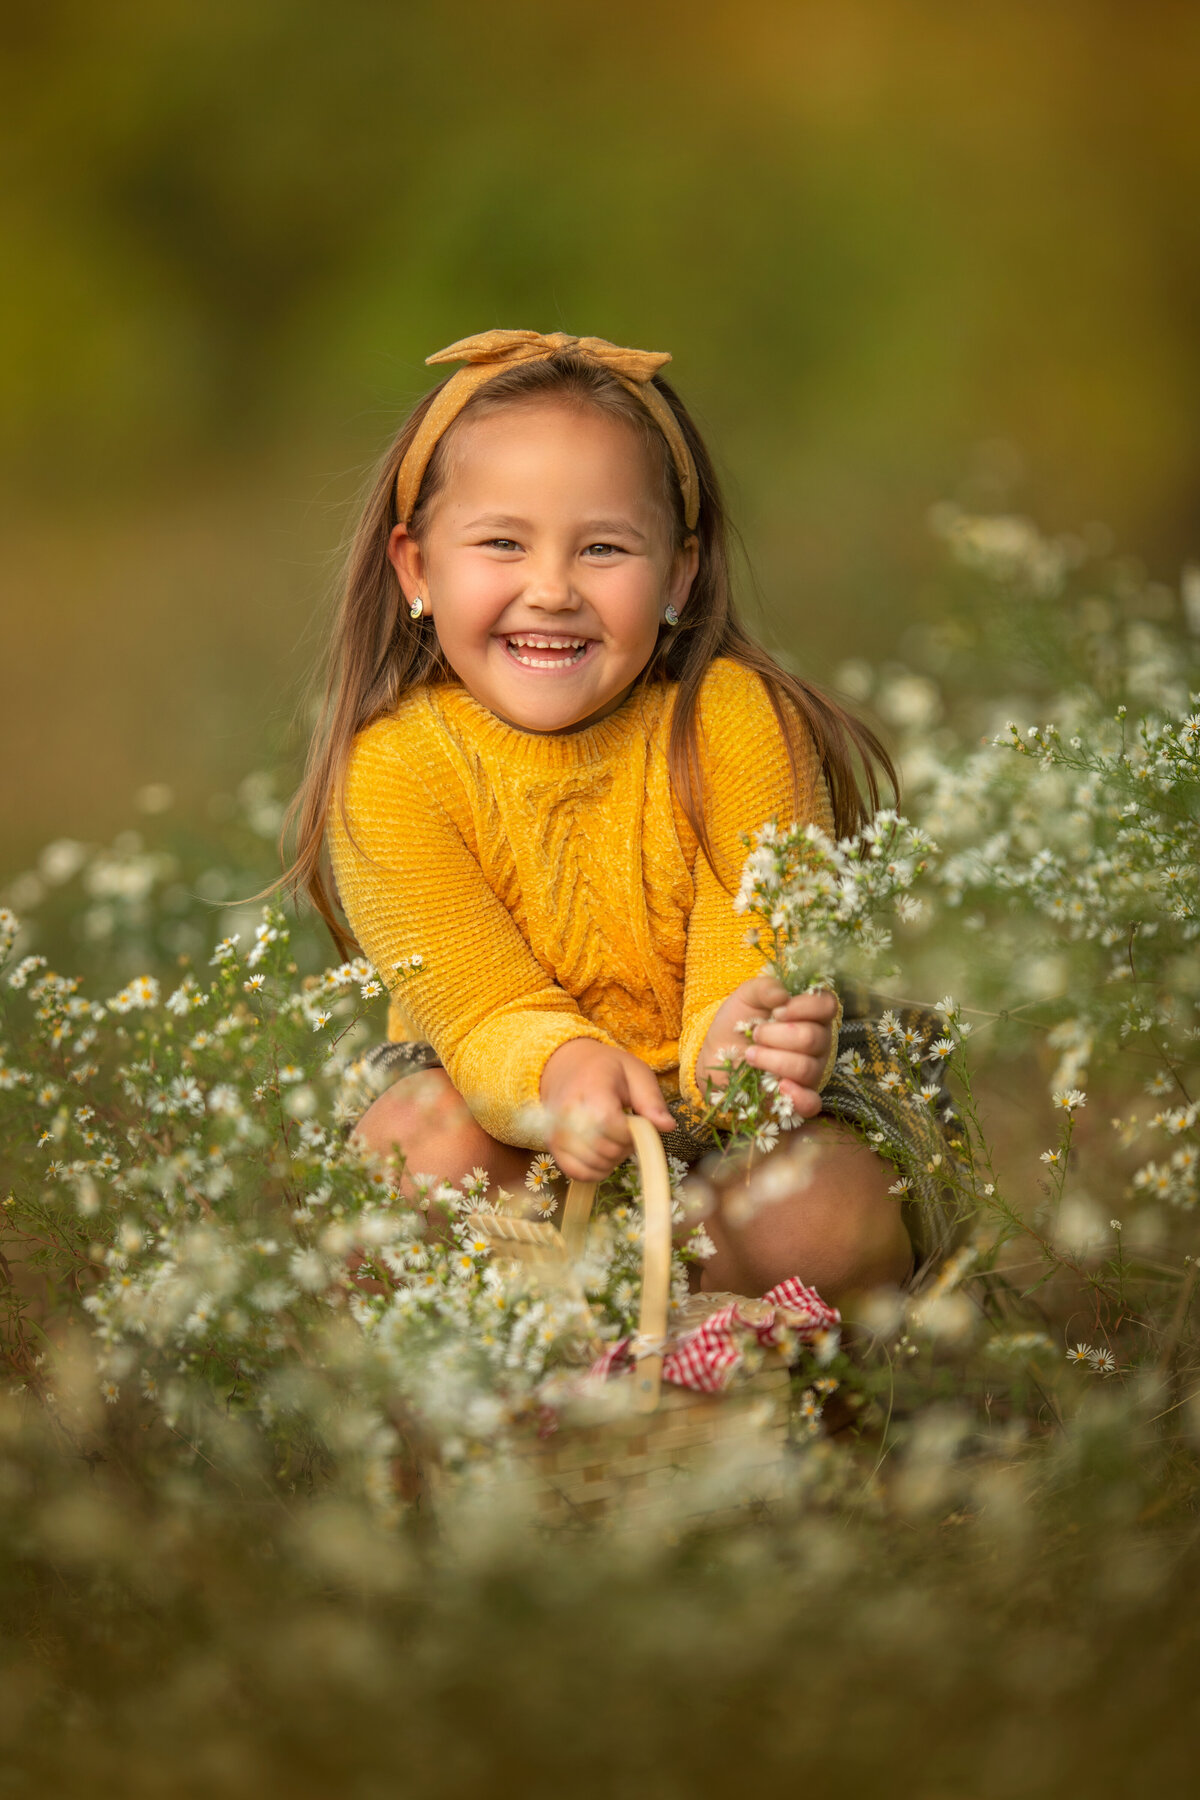 girl with a big smile is picking daisies in the fall in mustard color outfit and headband.